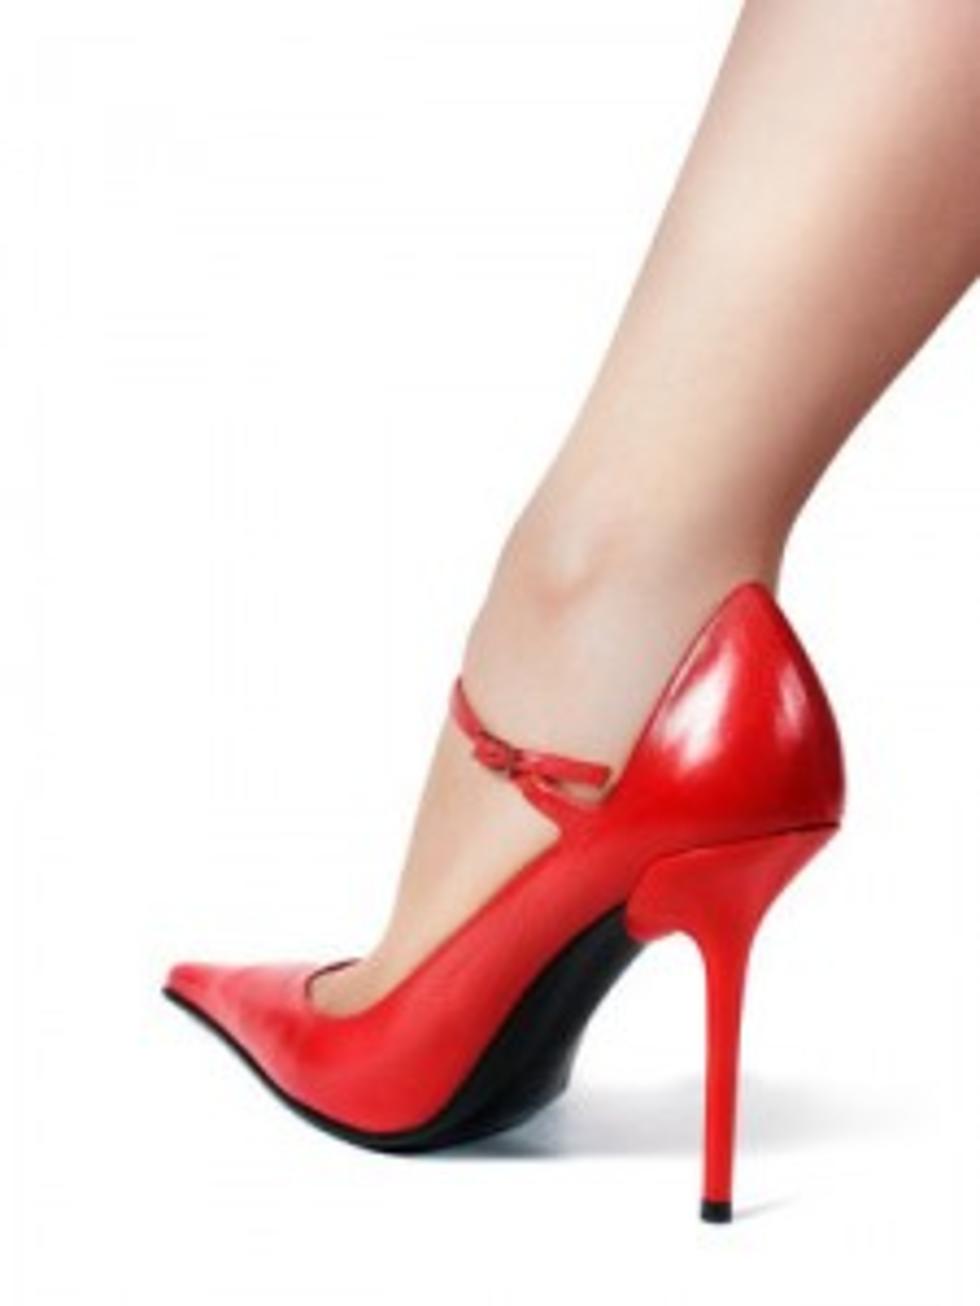 East Idaho Woman Charged for High Heel Attack